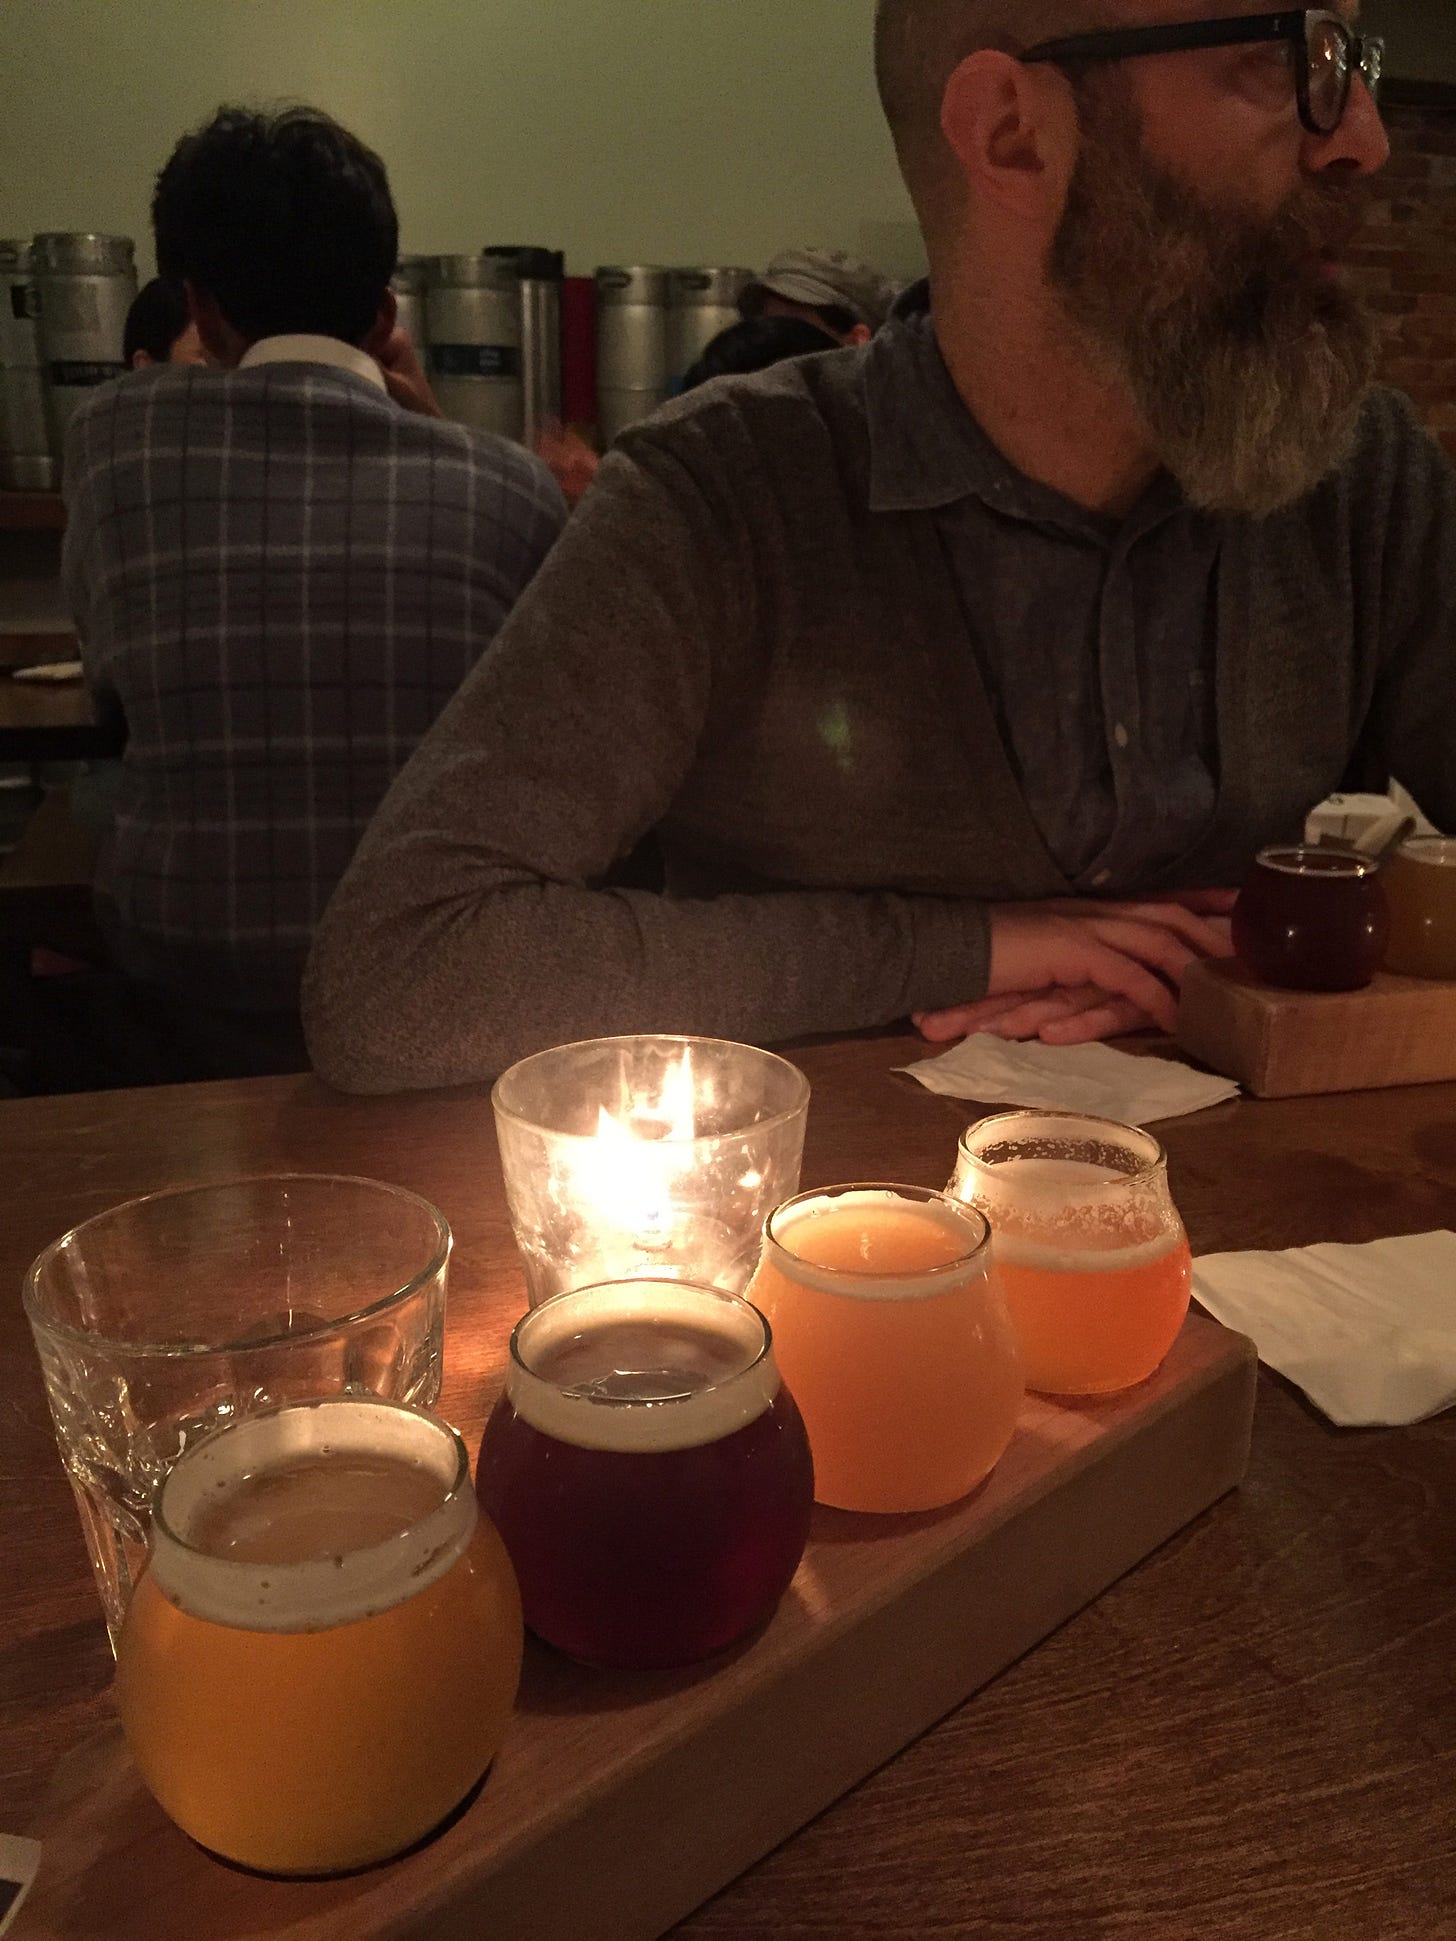 a flight of 4 beers in varying colours sits at an angle in the foreground, lit by a candle in a glass behind it. In the background, Iain, a bearded man in a light blue shirt, sits with his arms on the table in front of his own flight of beer, looking slightly to his left.